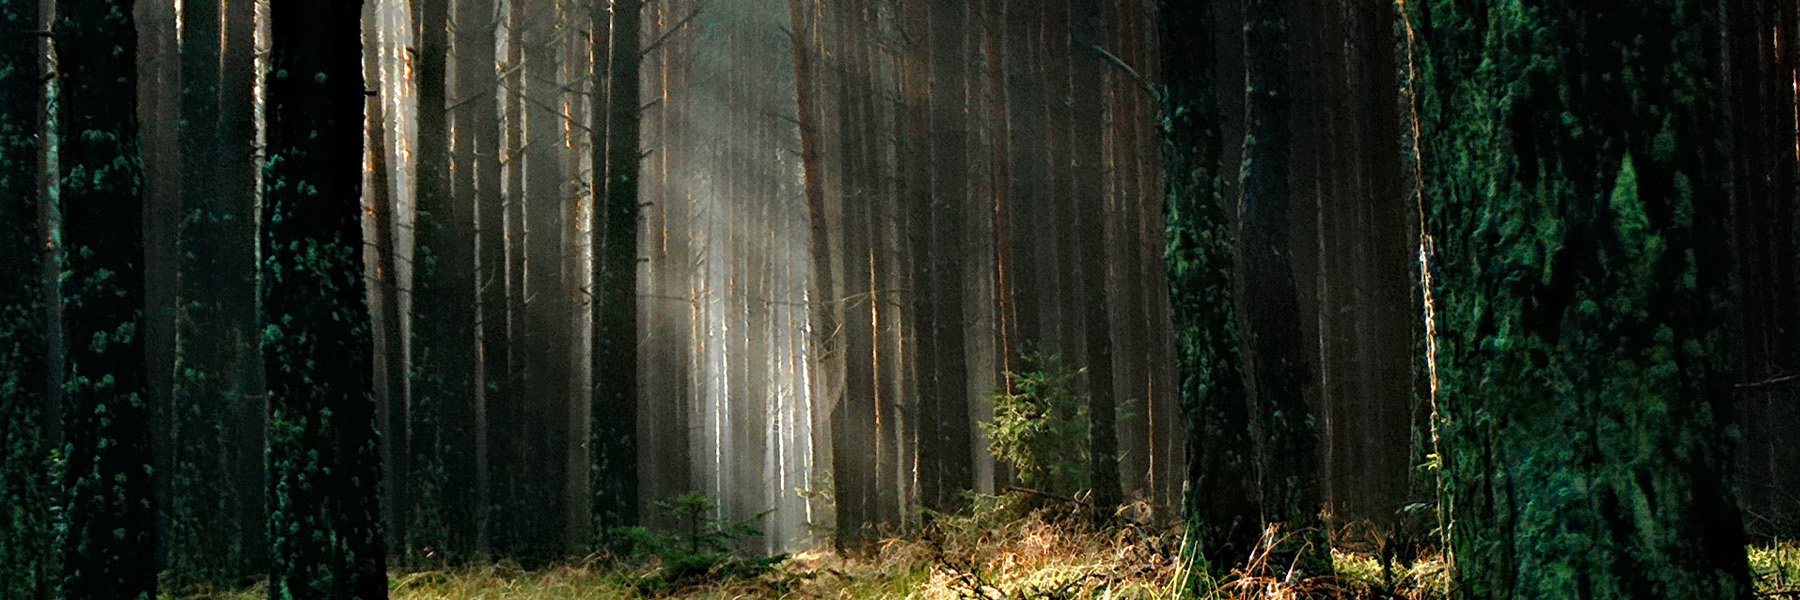 a forest with sunlight shining through the trees